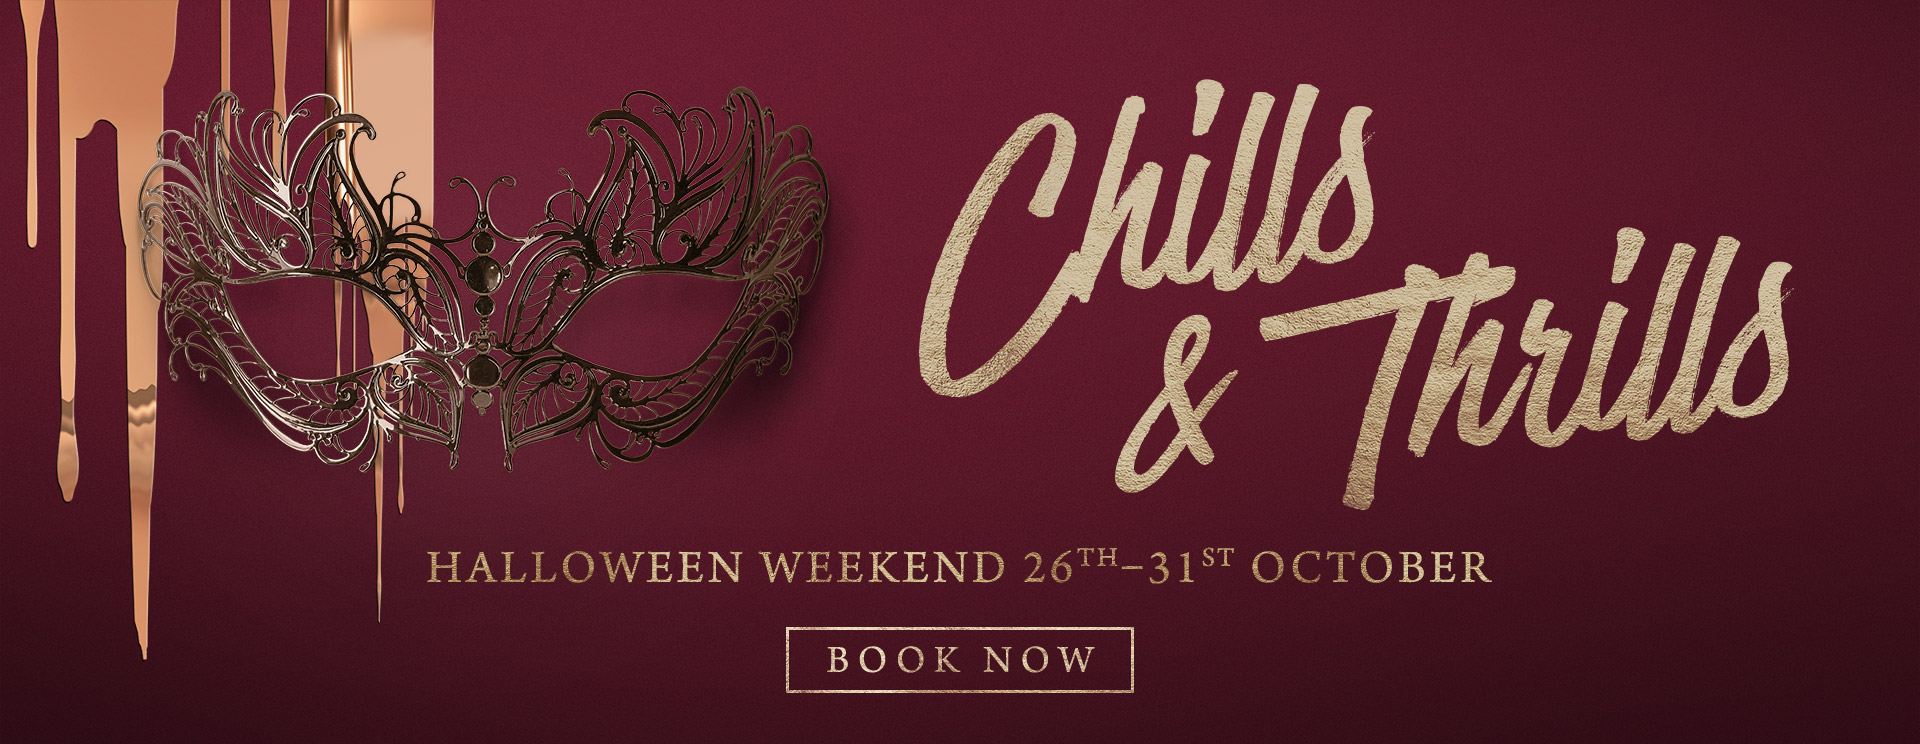 Chills & Thrills this Halloween at The Boot Inn